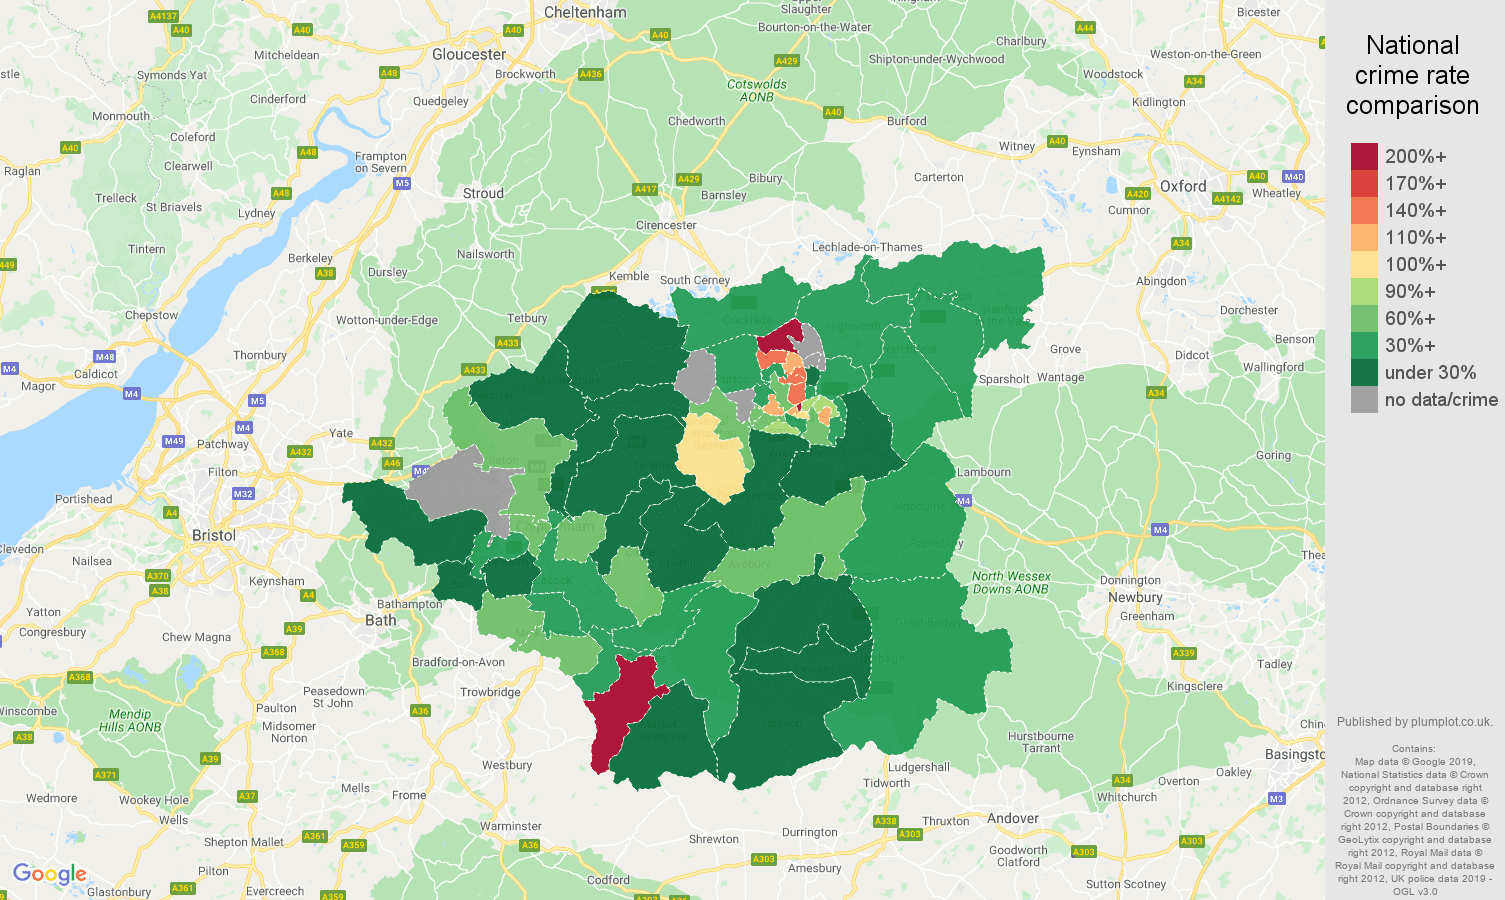 Swindon other crime rate comparison map